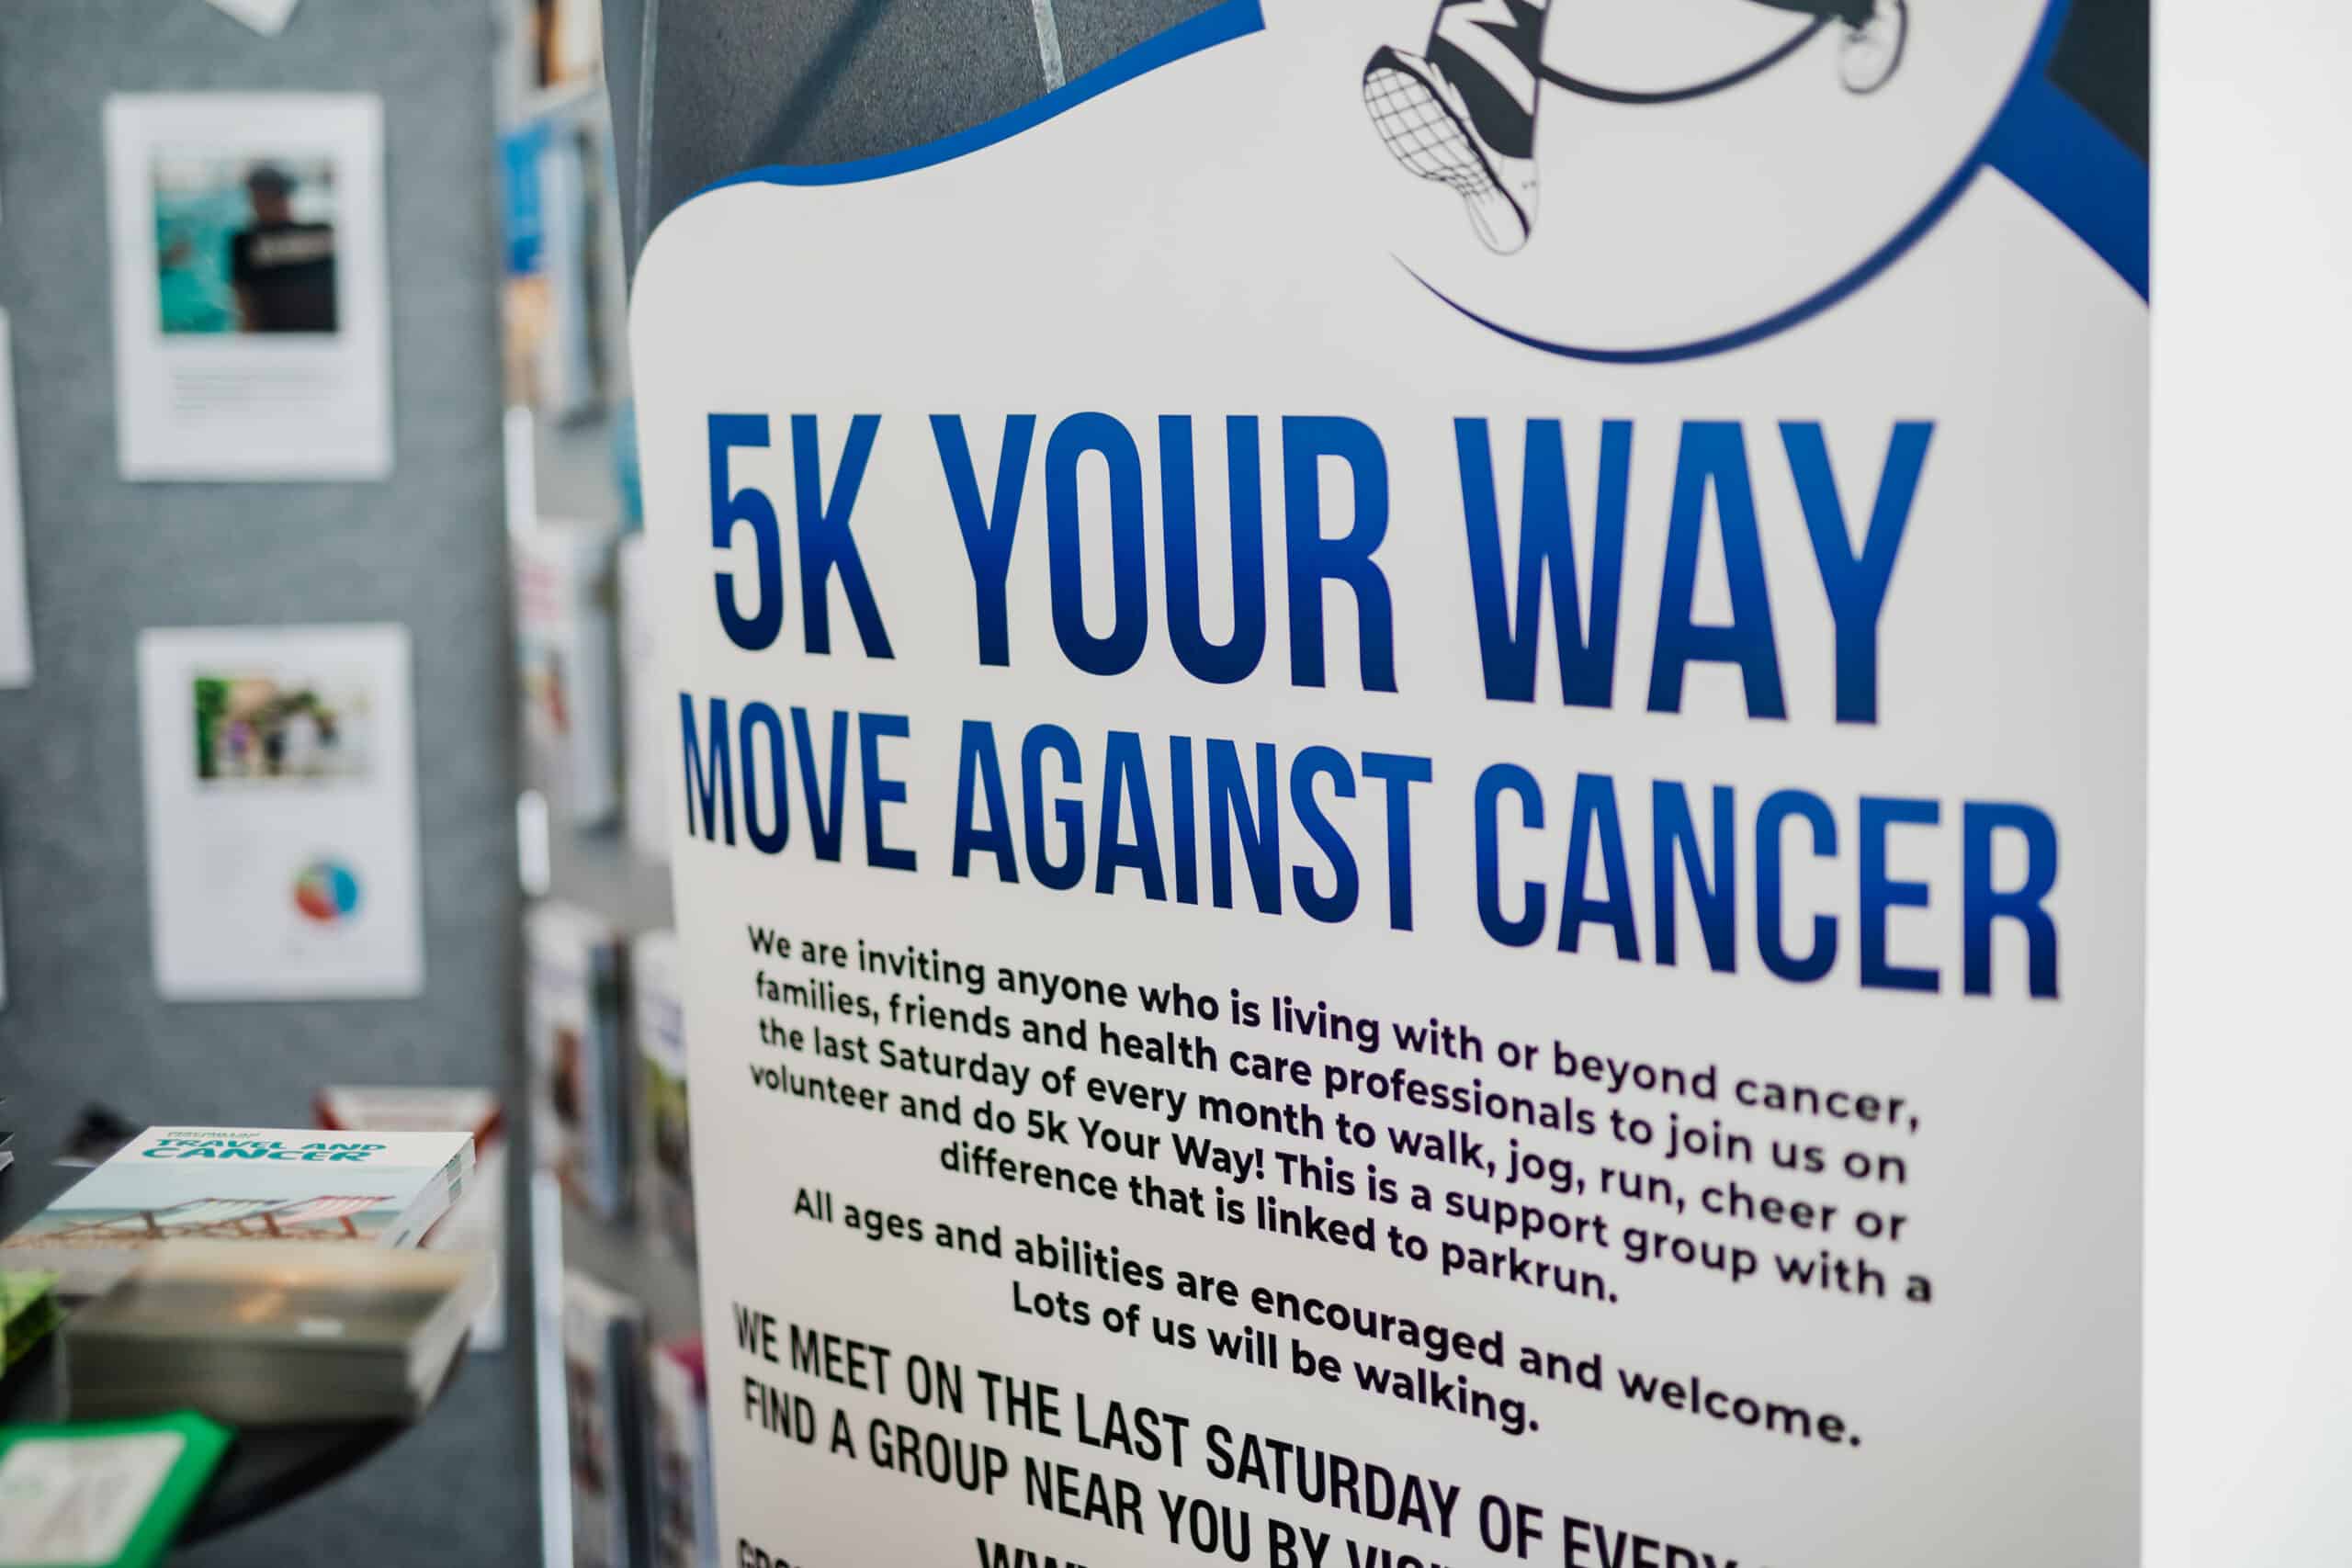 picture of a display board with information about the 5K your way on it